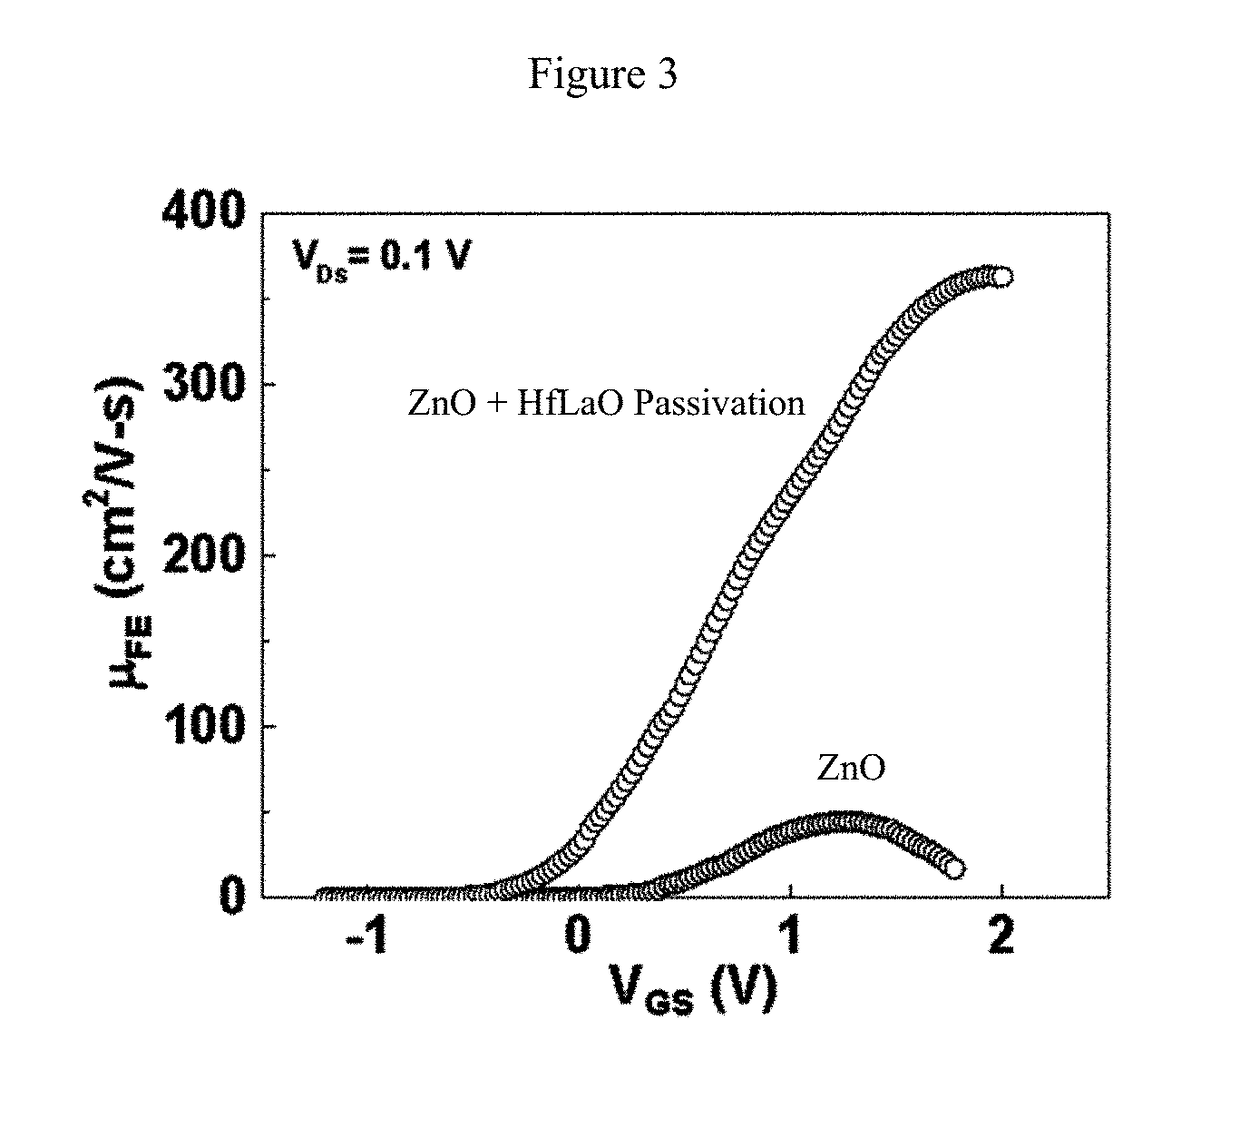 HfLaO passivated zinc-oxide thin-film transistor with high field-effect mobility